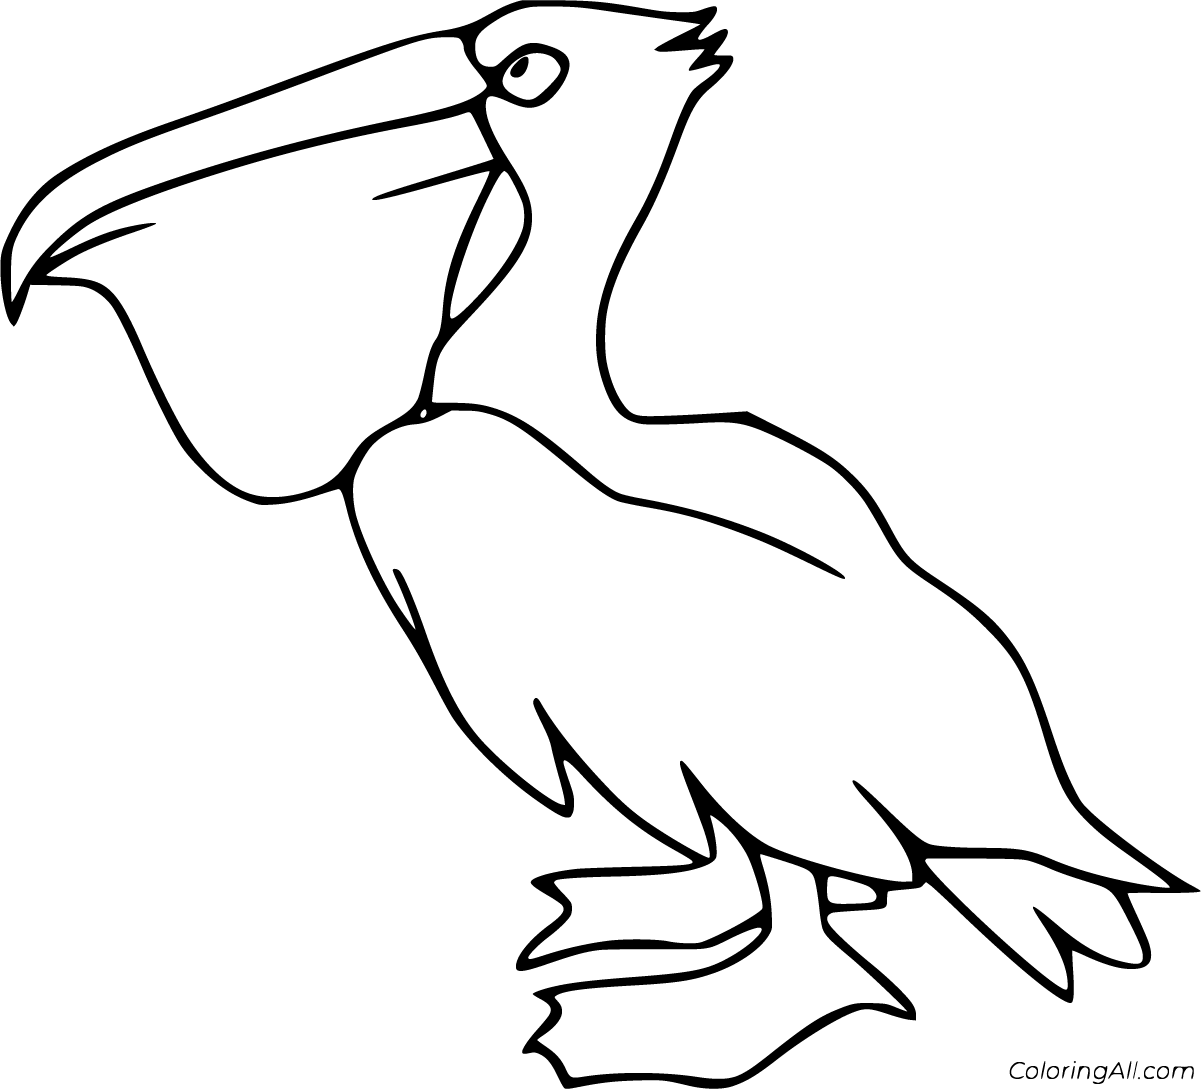 Pelican Coloring Pages - ColoringAll